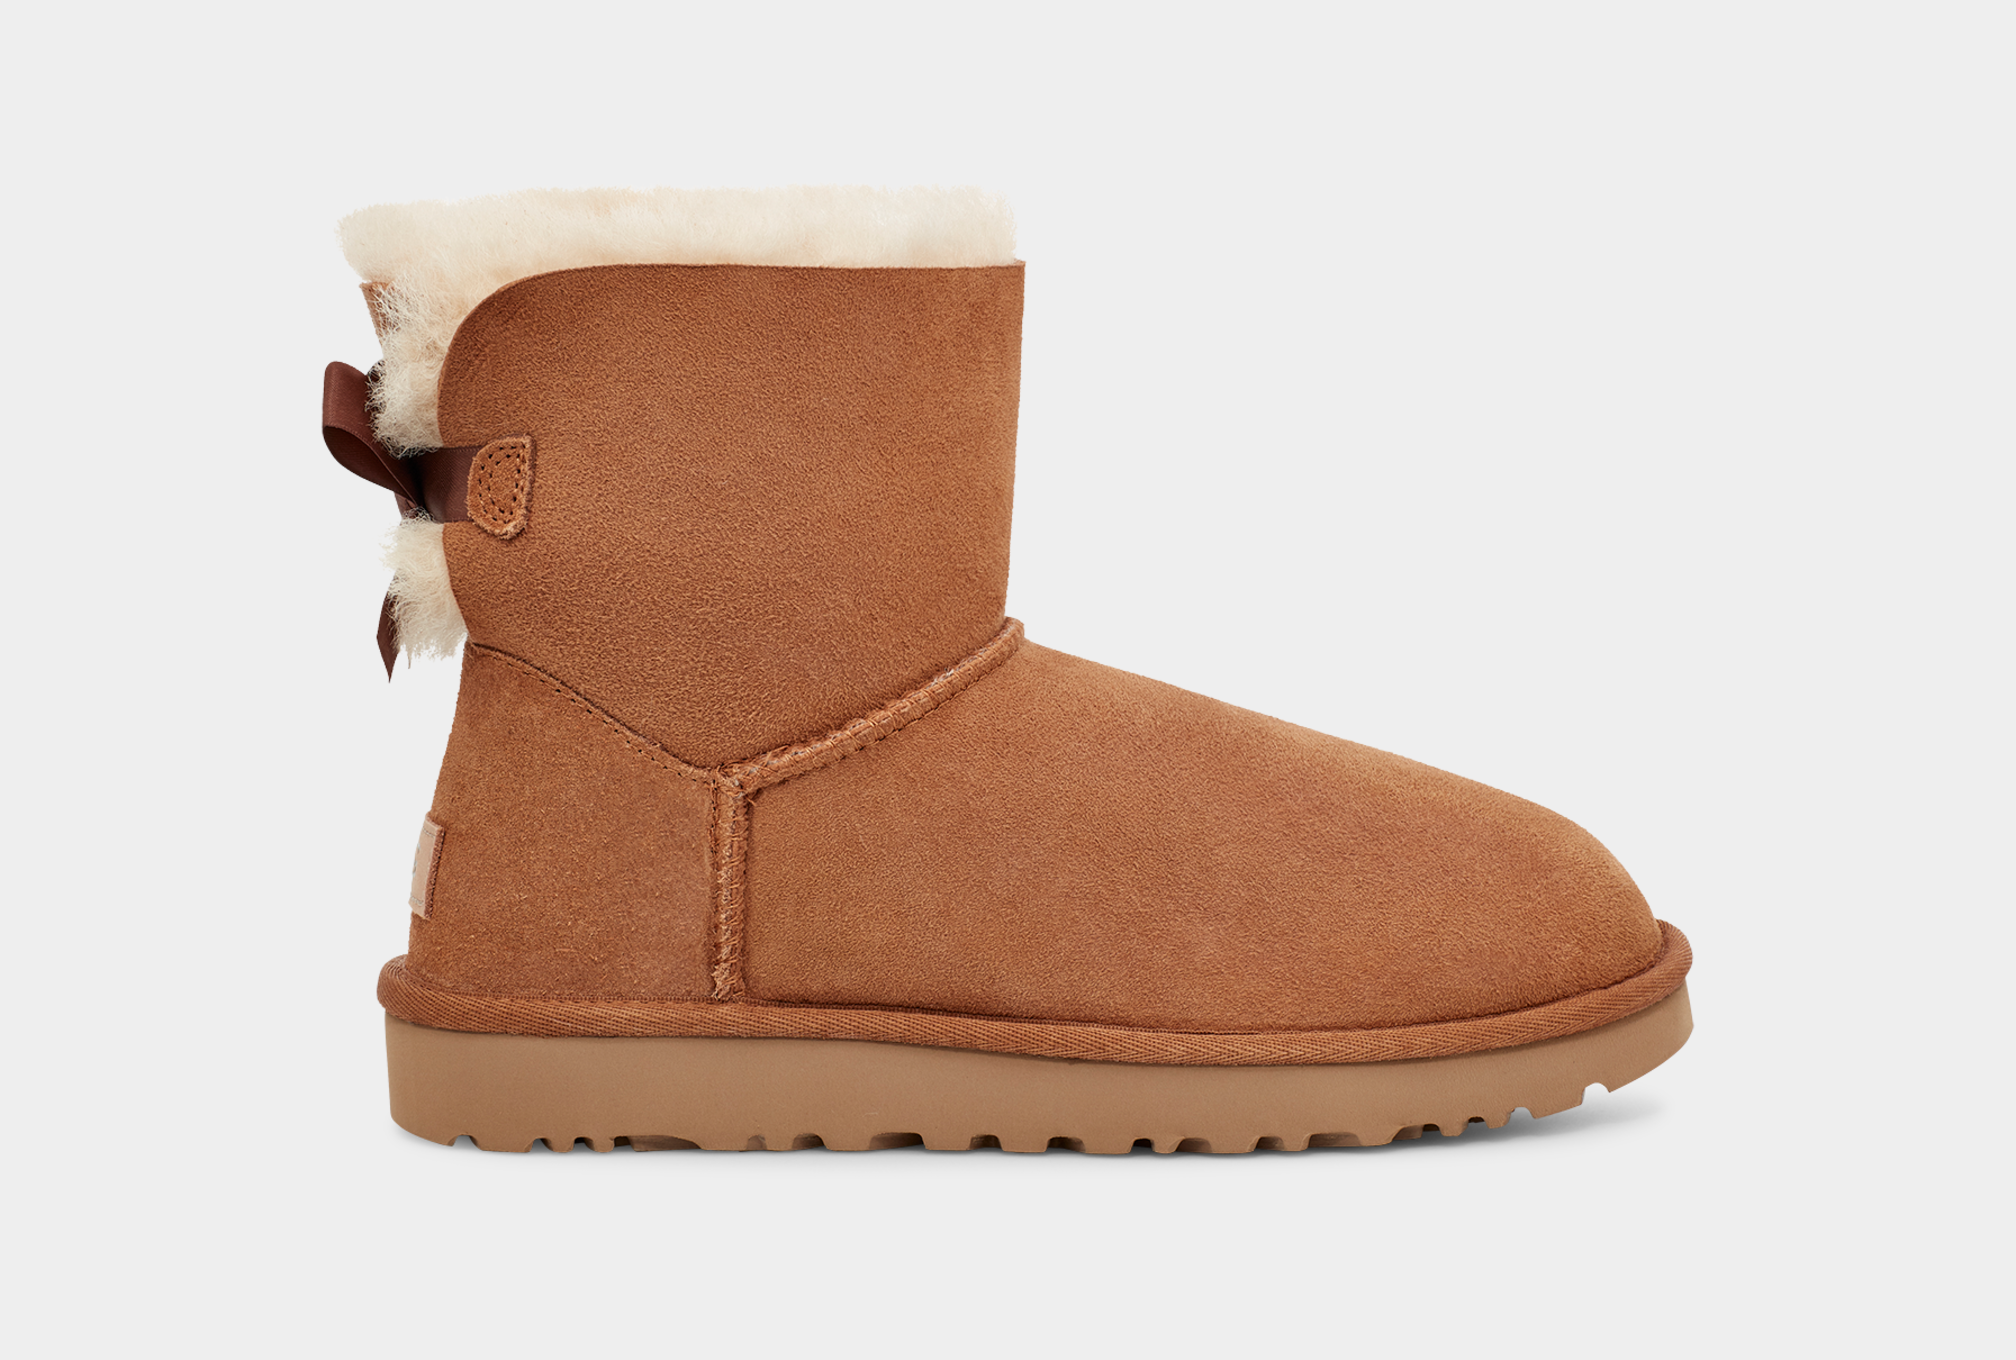 Ugg Boots on Sale: 9 Styles to Buy for Fall and Winter